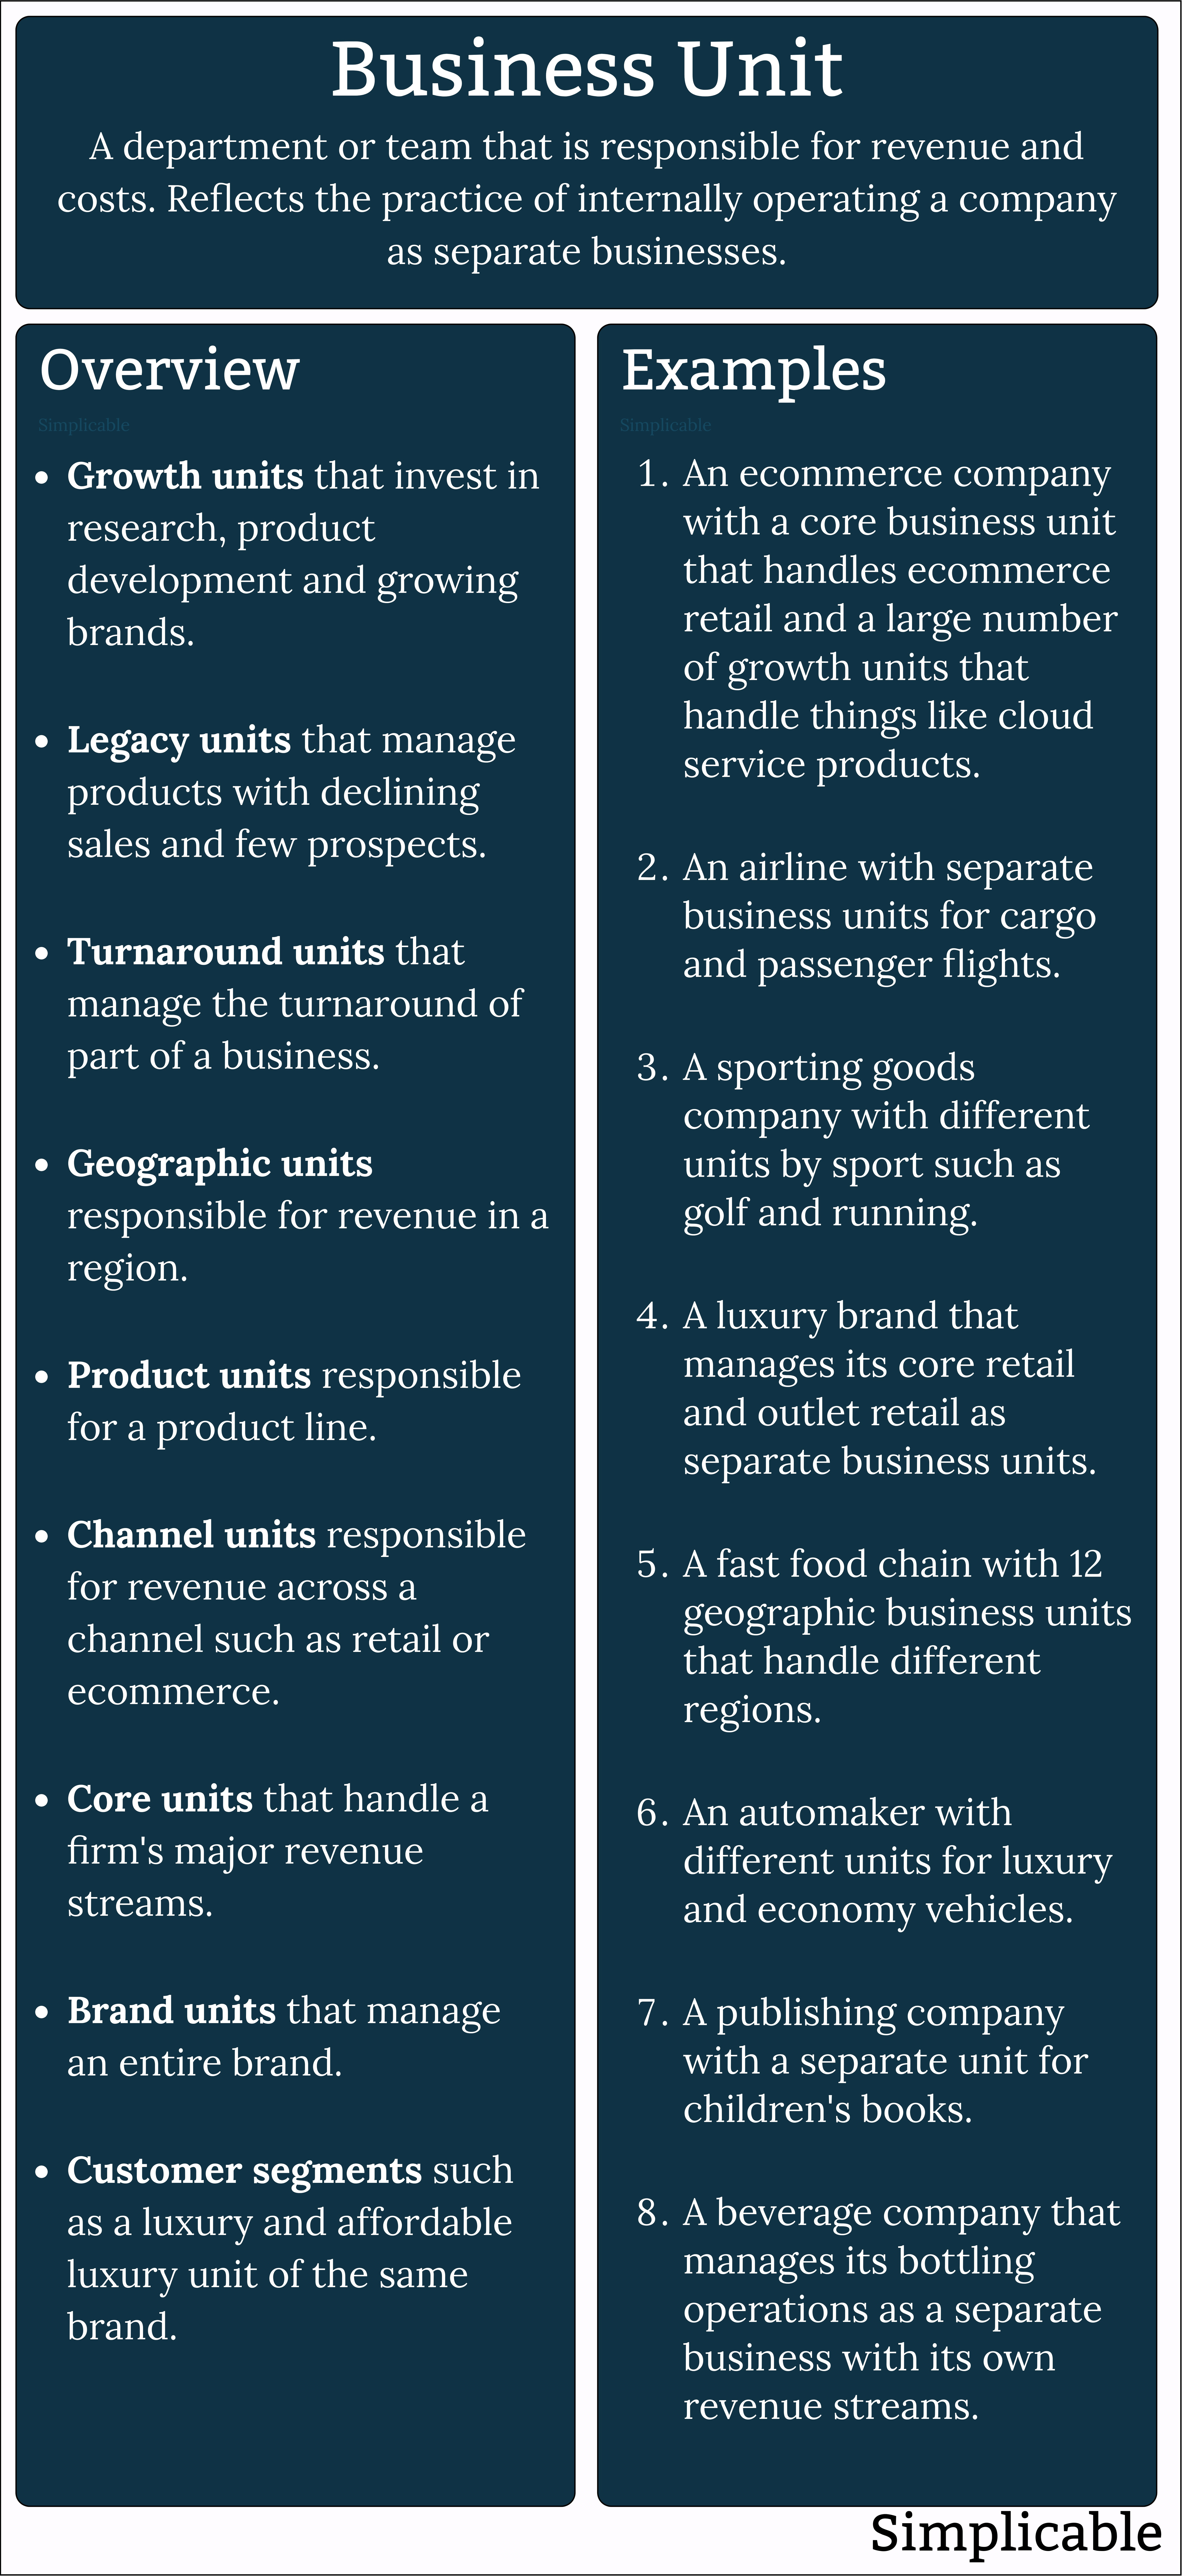 business unit overview and examples